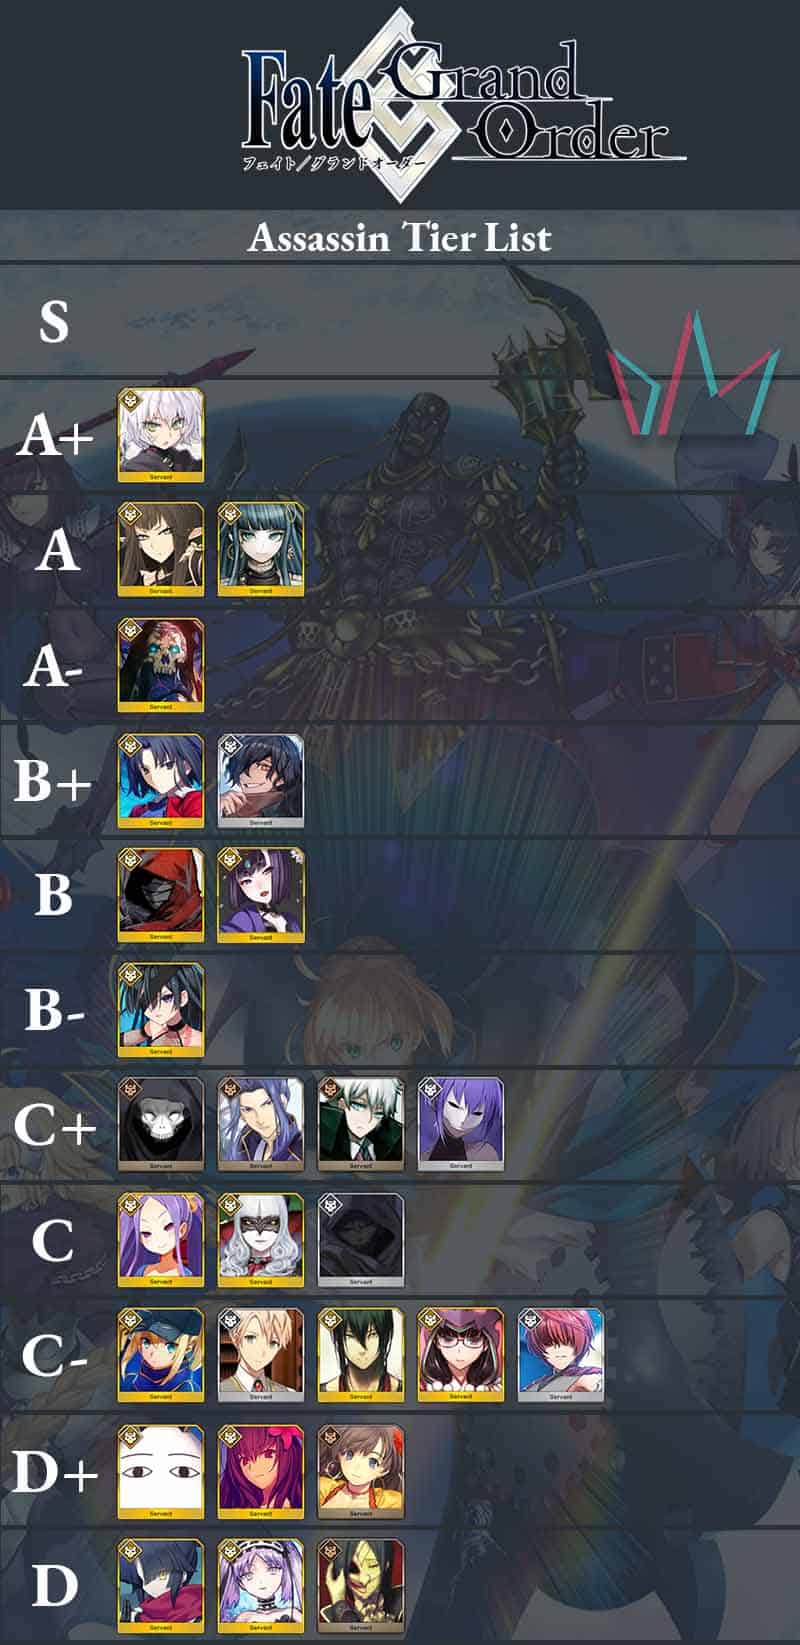 grand chase tier list s and sr rank